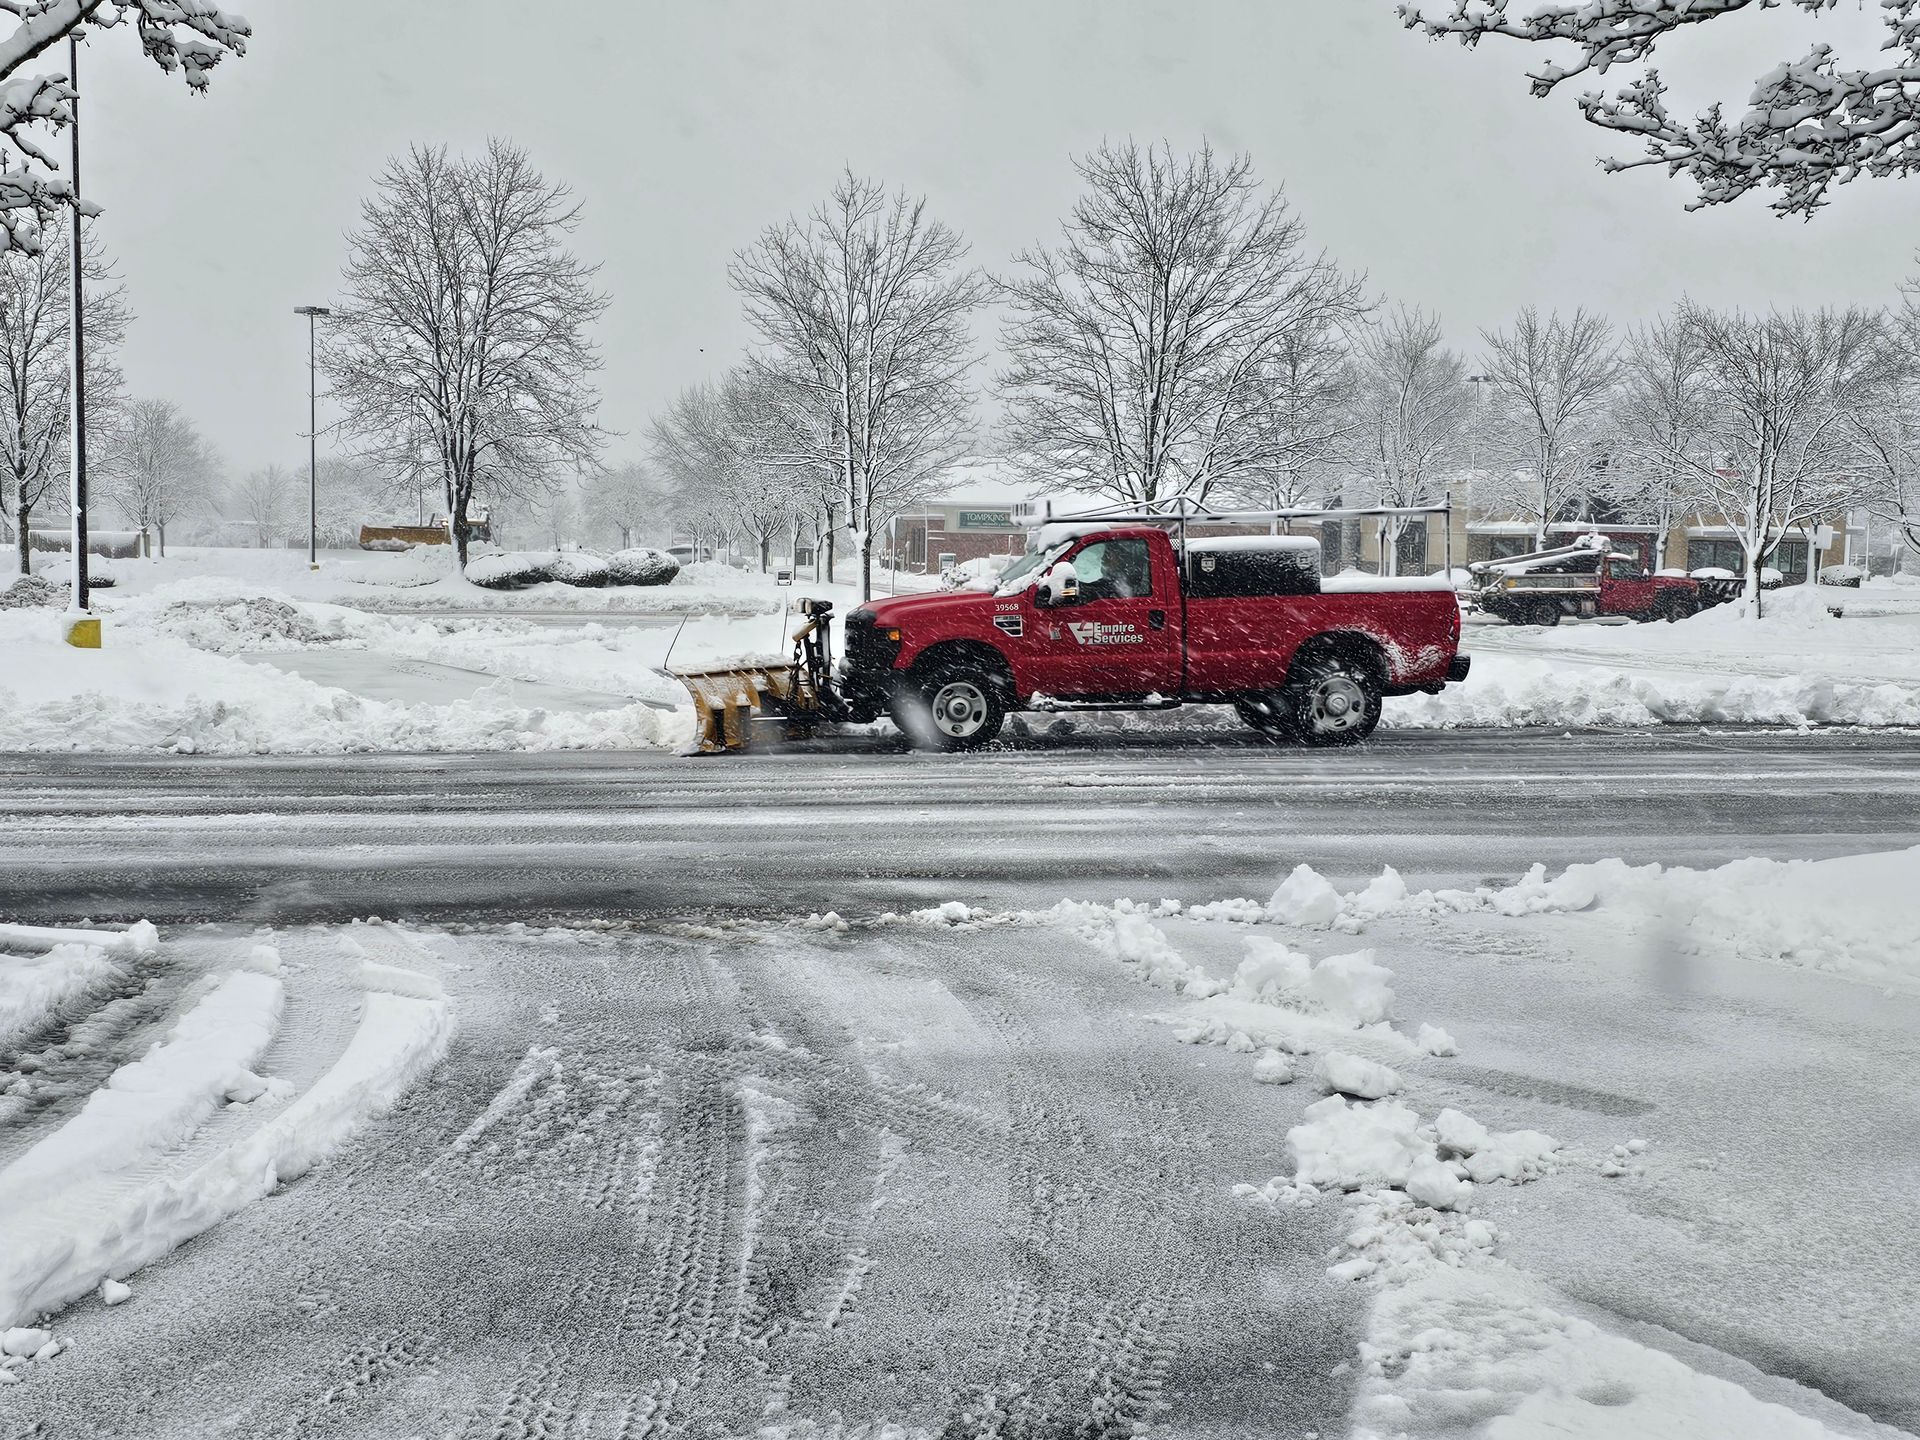 A red truck is plowing snow on the side of the road.